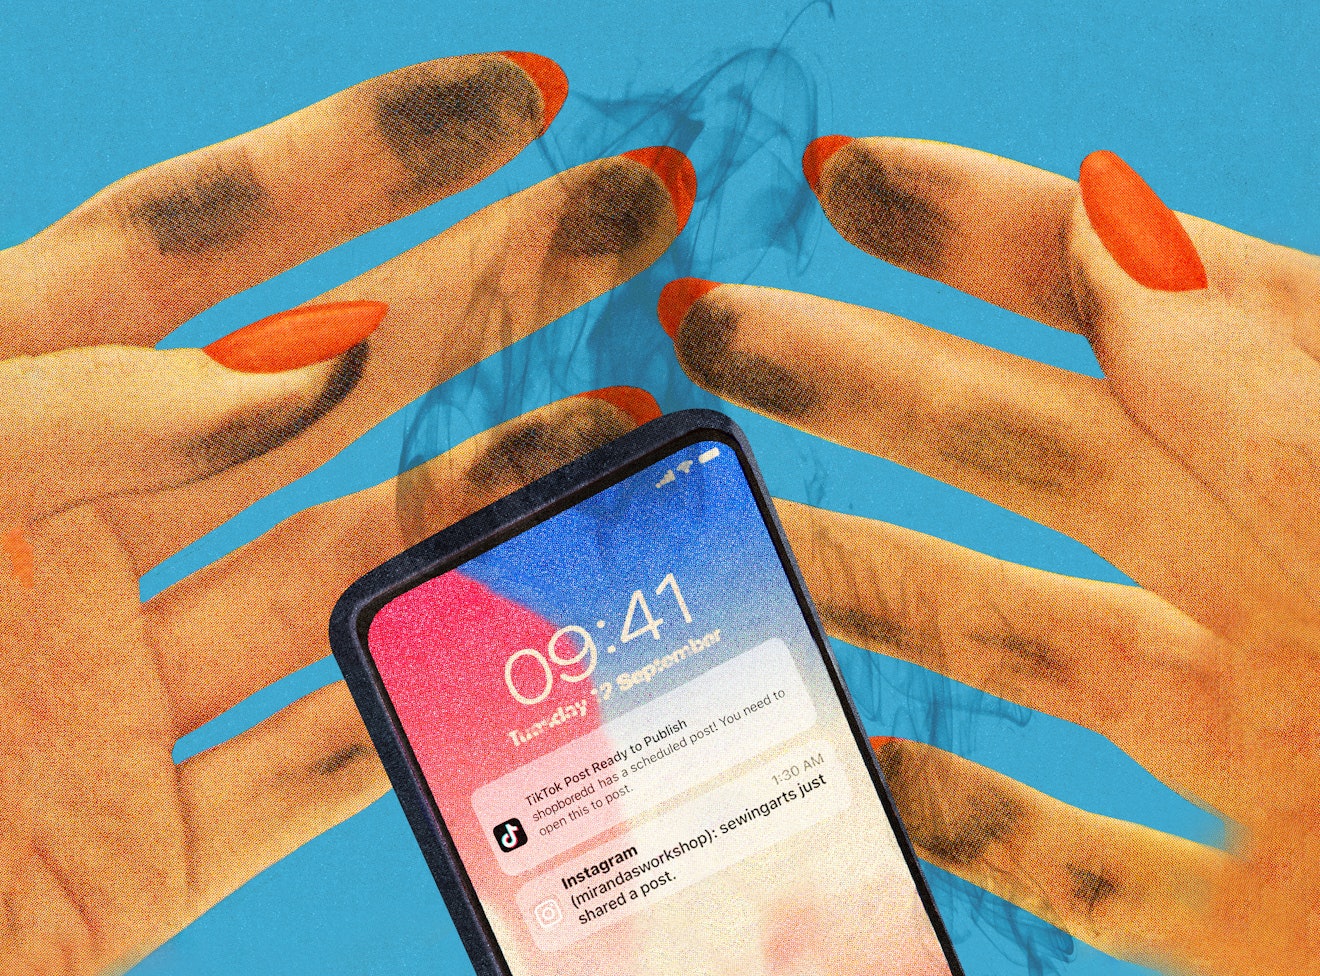 A phone is dropped as if on fire in this illustration.